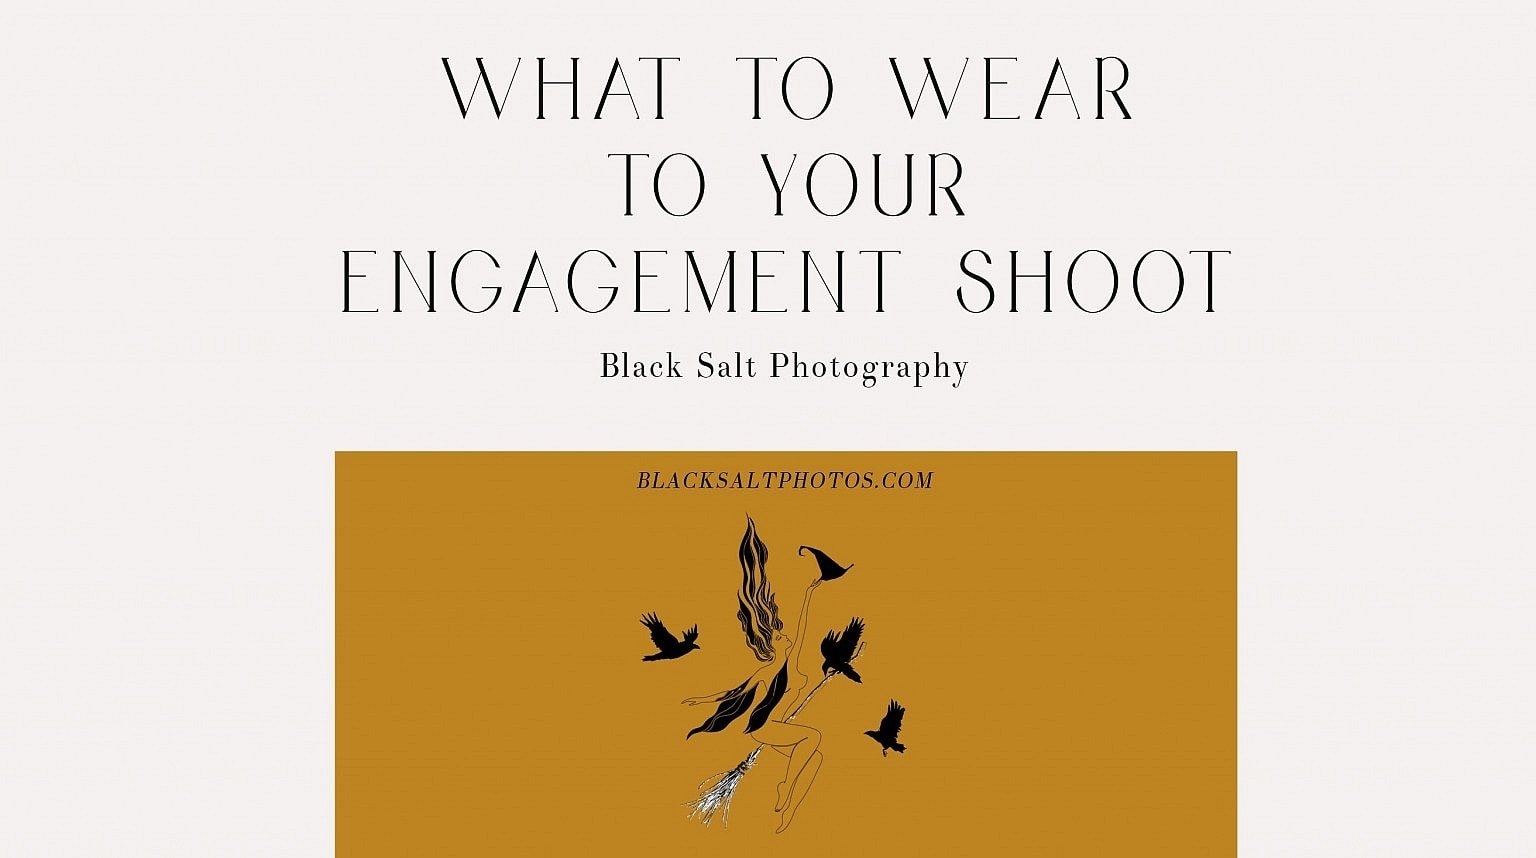 Educational blog on what to wear to your engagement shoot